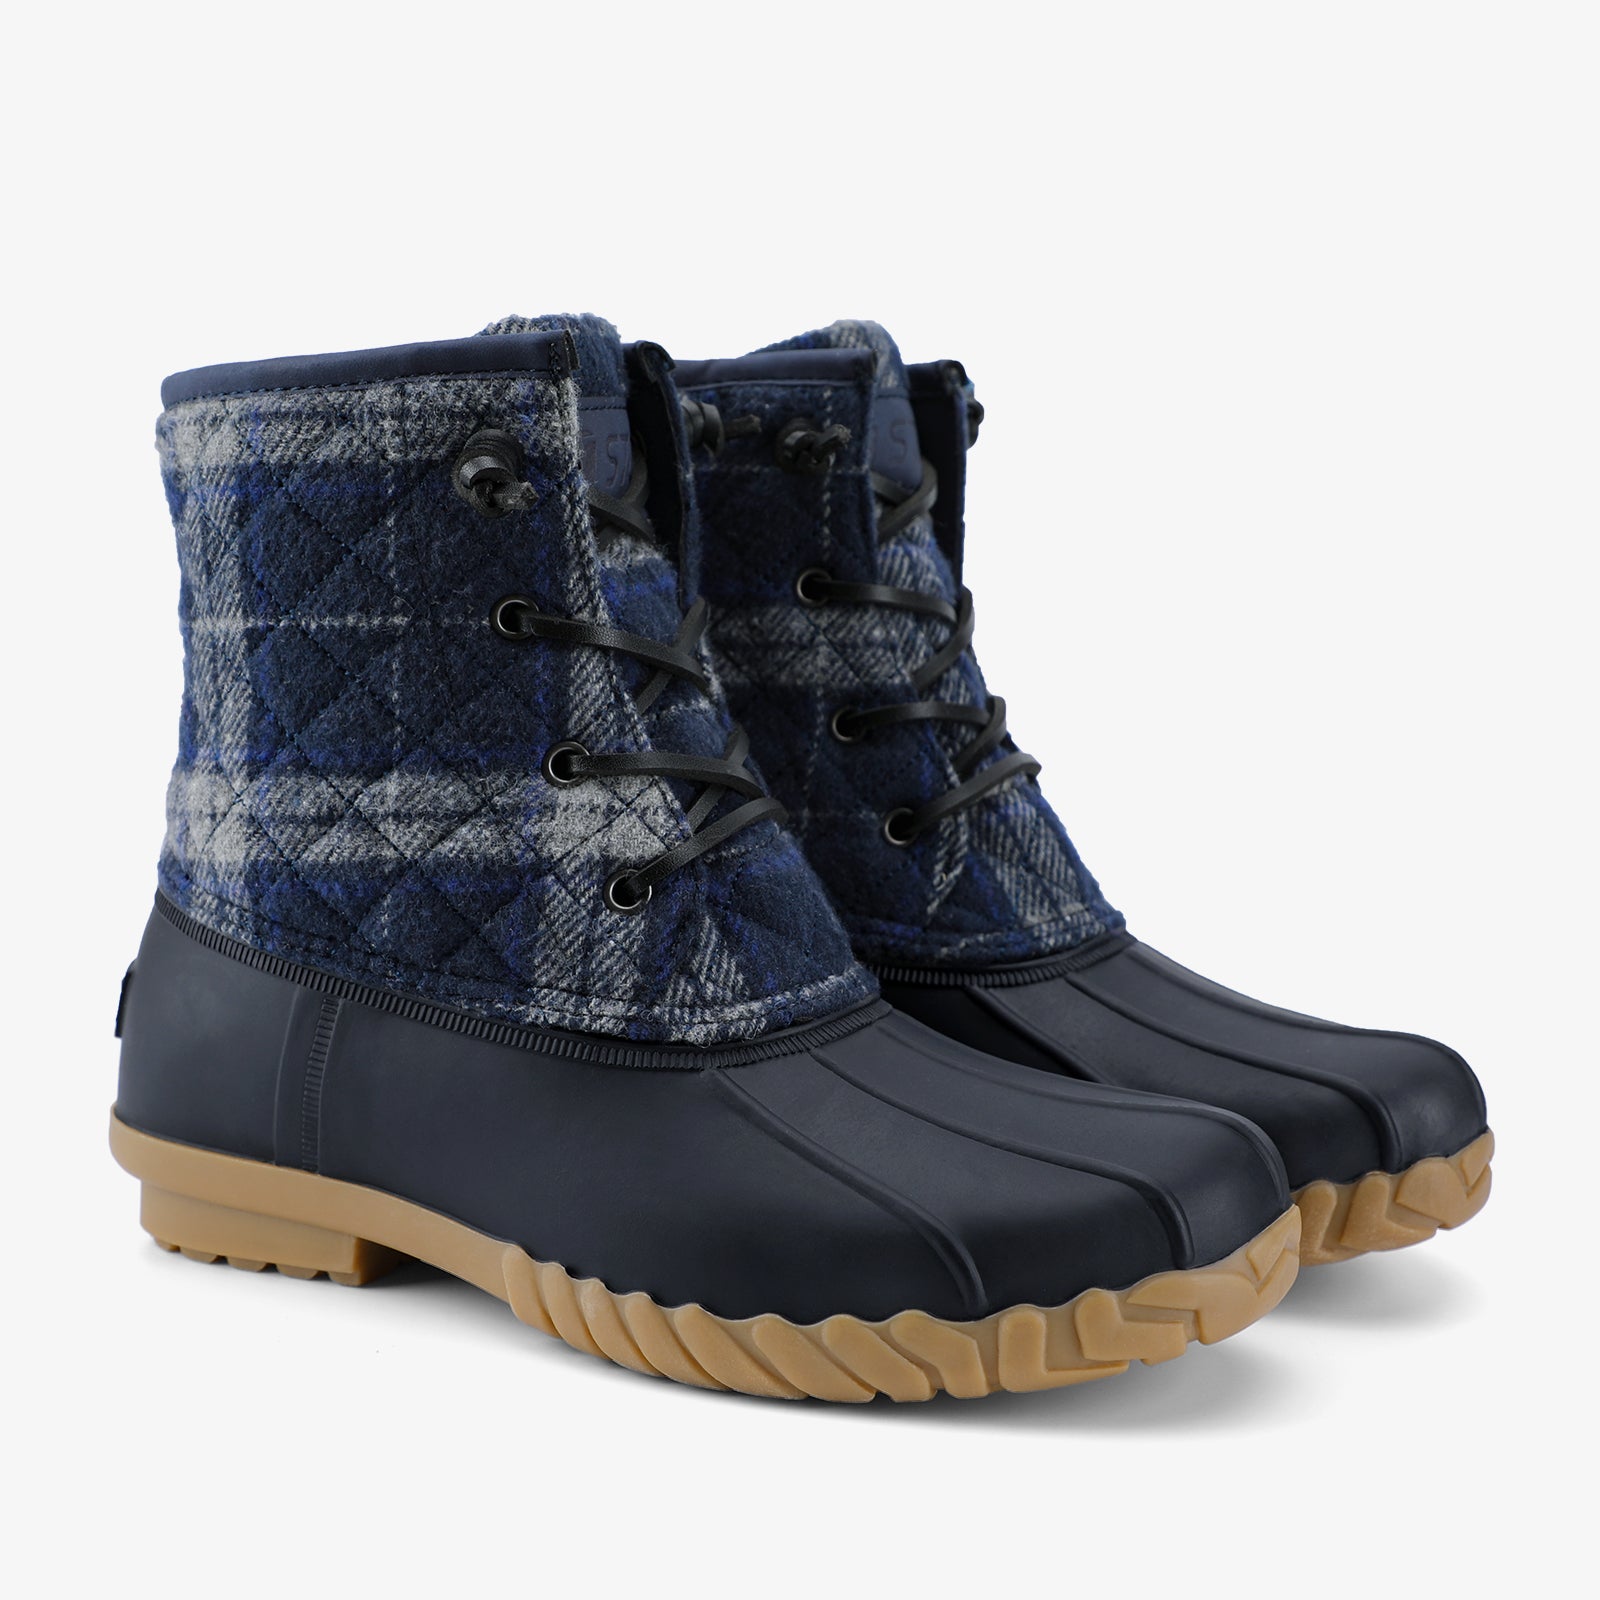 stq-product-view-duck-boots-snow-winter-boots